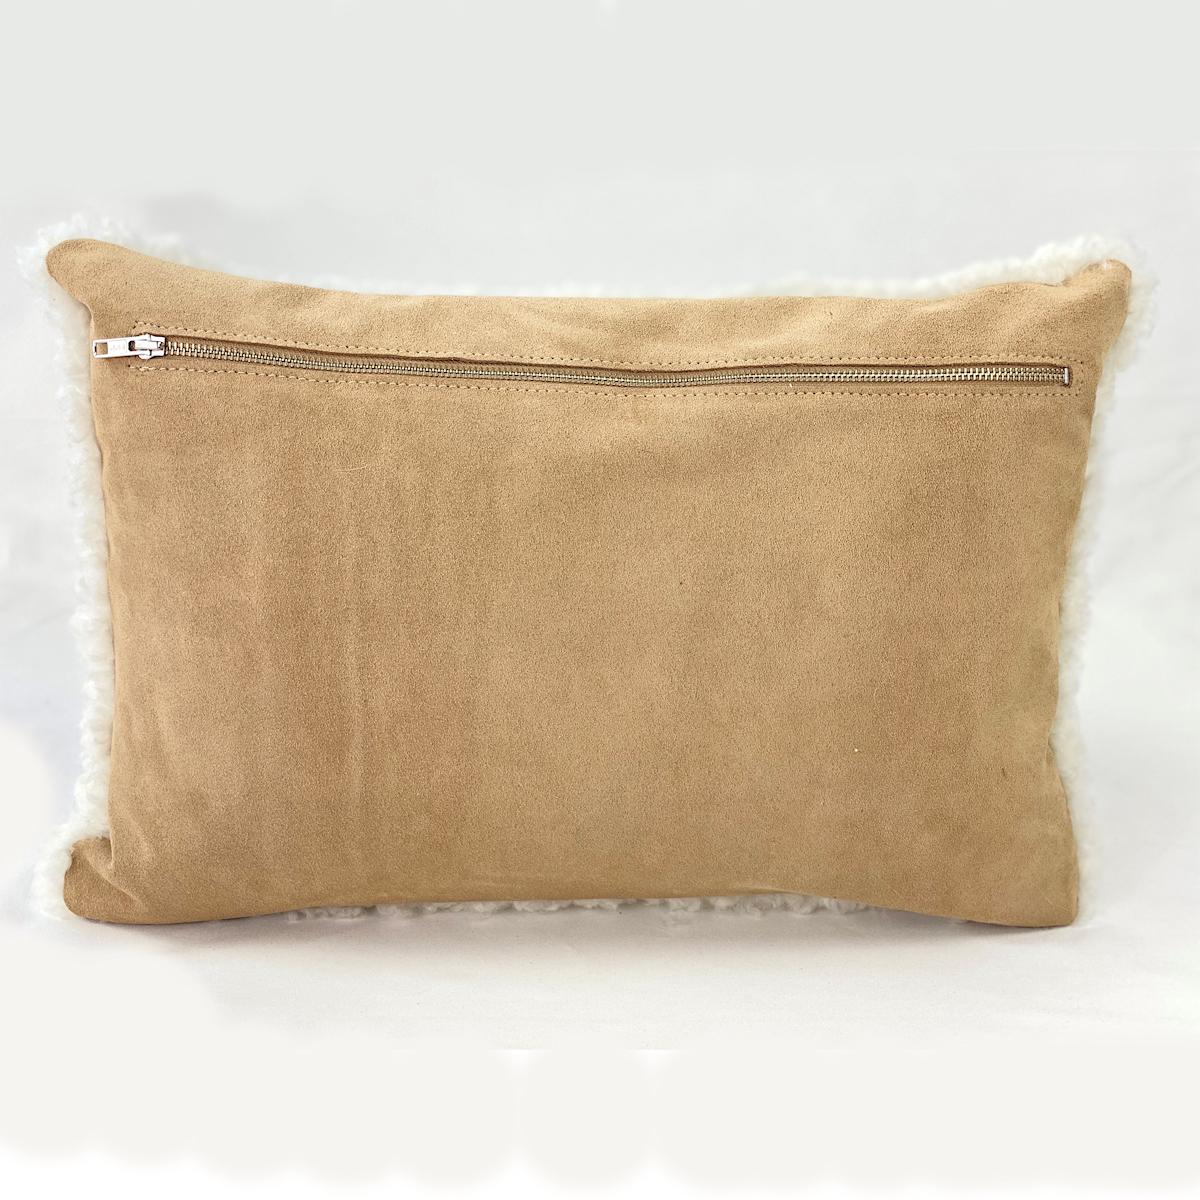 Transform your space with charm and inviting textures with this shearling sheepskin pillow. The white sheepskin wool features a short and curly wool pile that will add refreshing touches to a room. Part of the boucle collection, this shearling